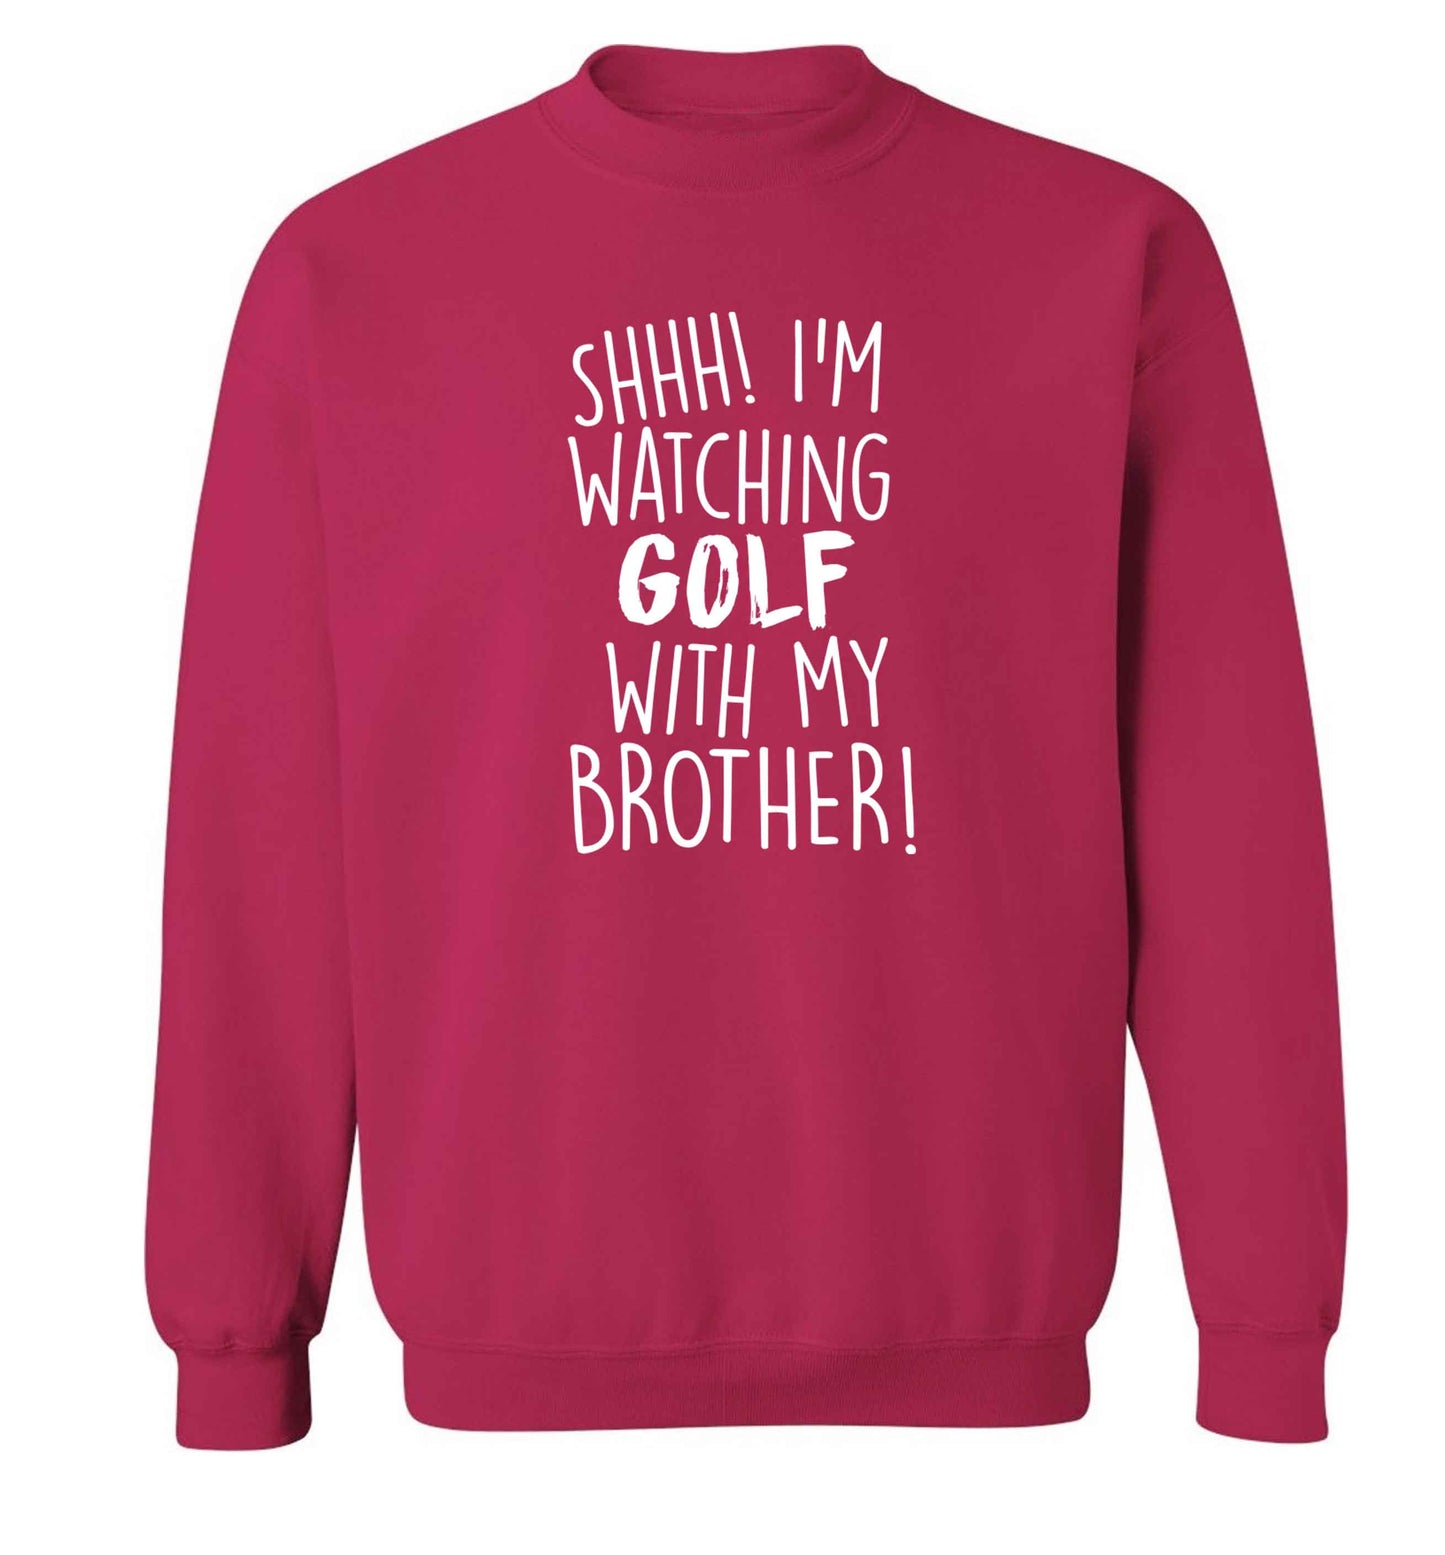 Shh I'm watching golf with my brother Adult's unisex pink Sweater 2XL